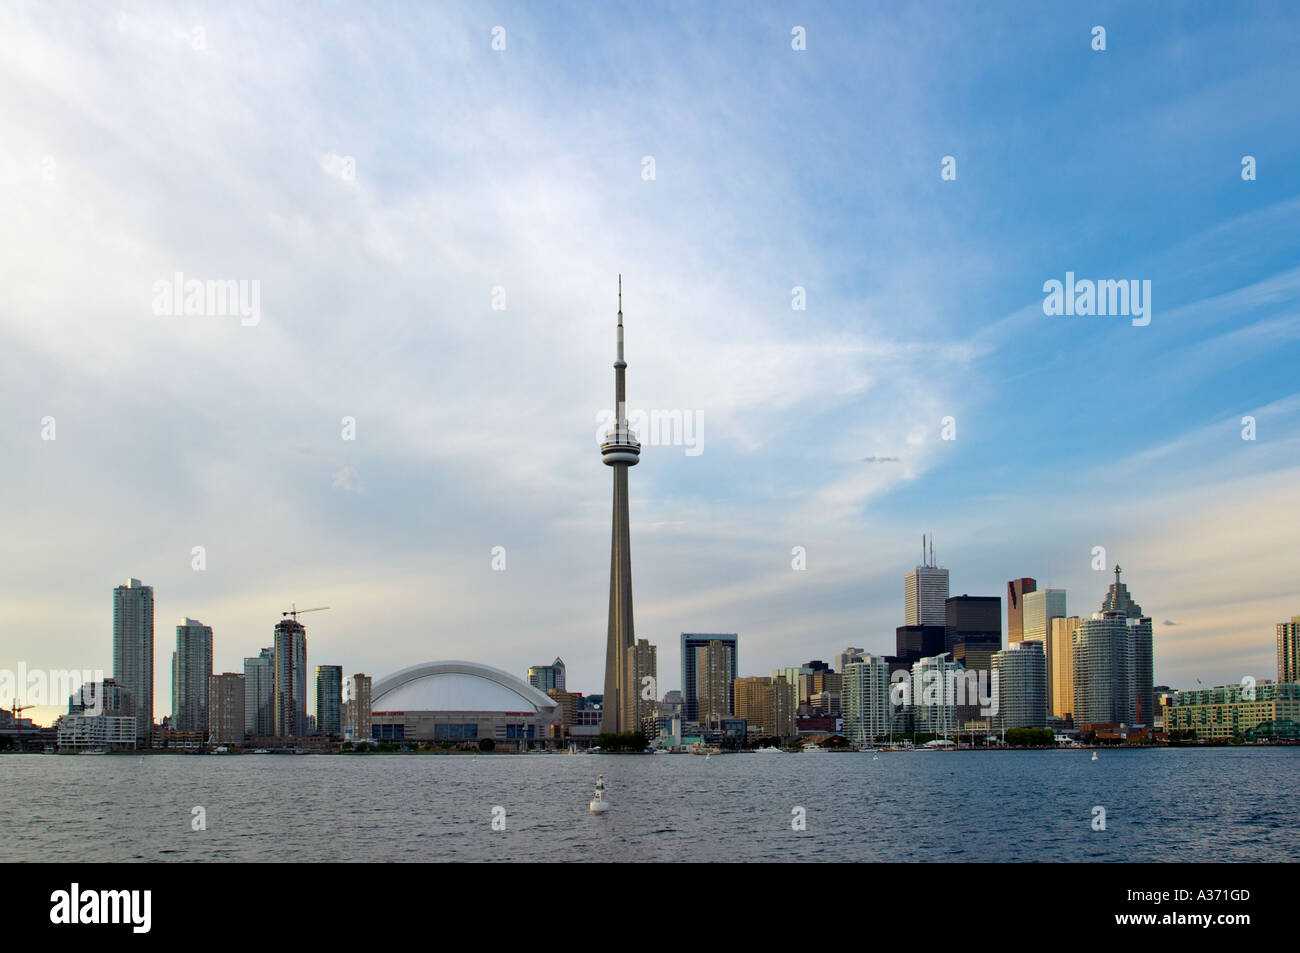 Toronto skyline against natural fantastic-looking sky. View from the Toronto islands across lake Ontario. Stock Photo